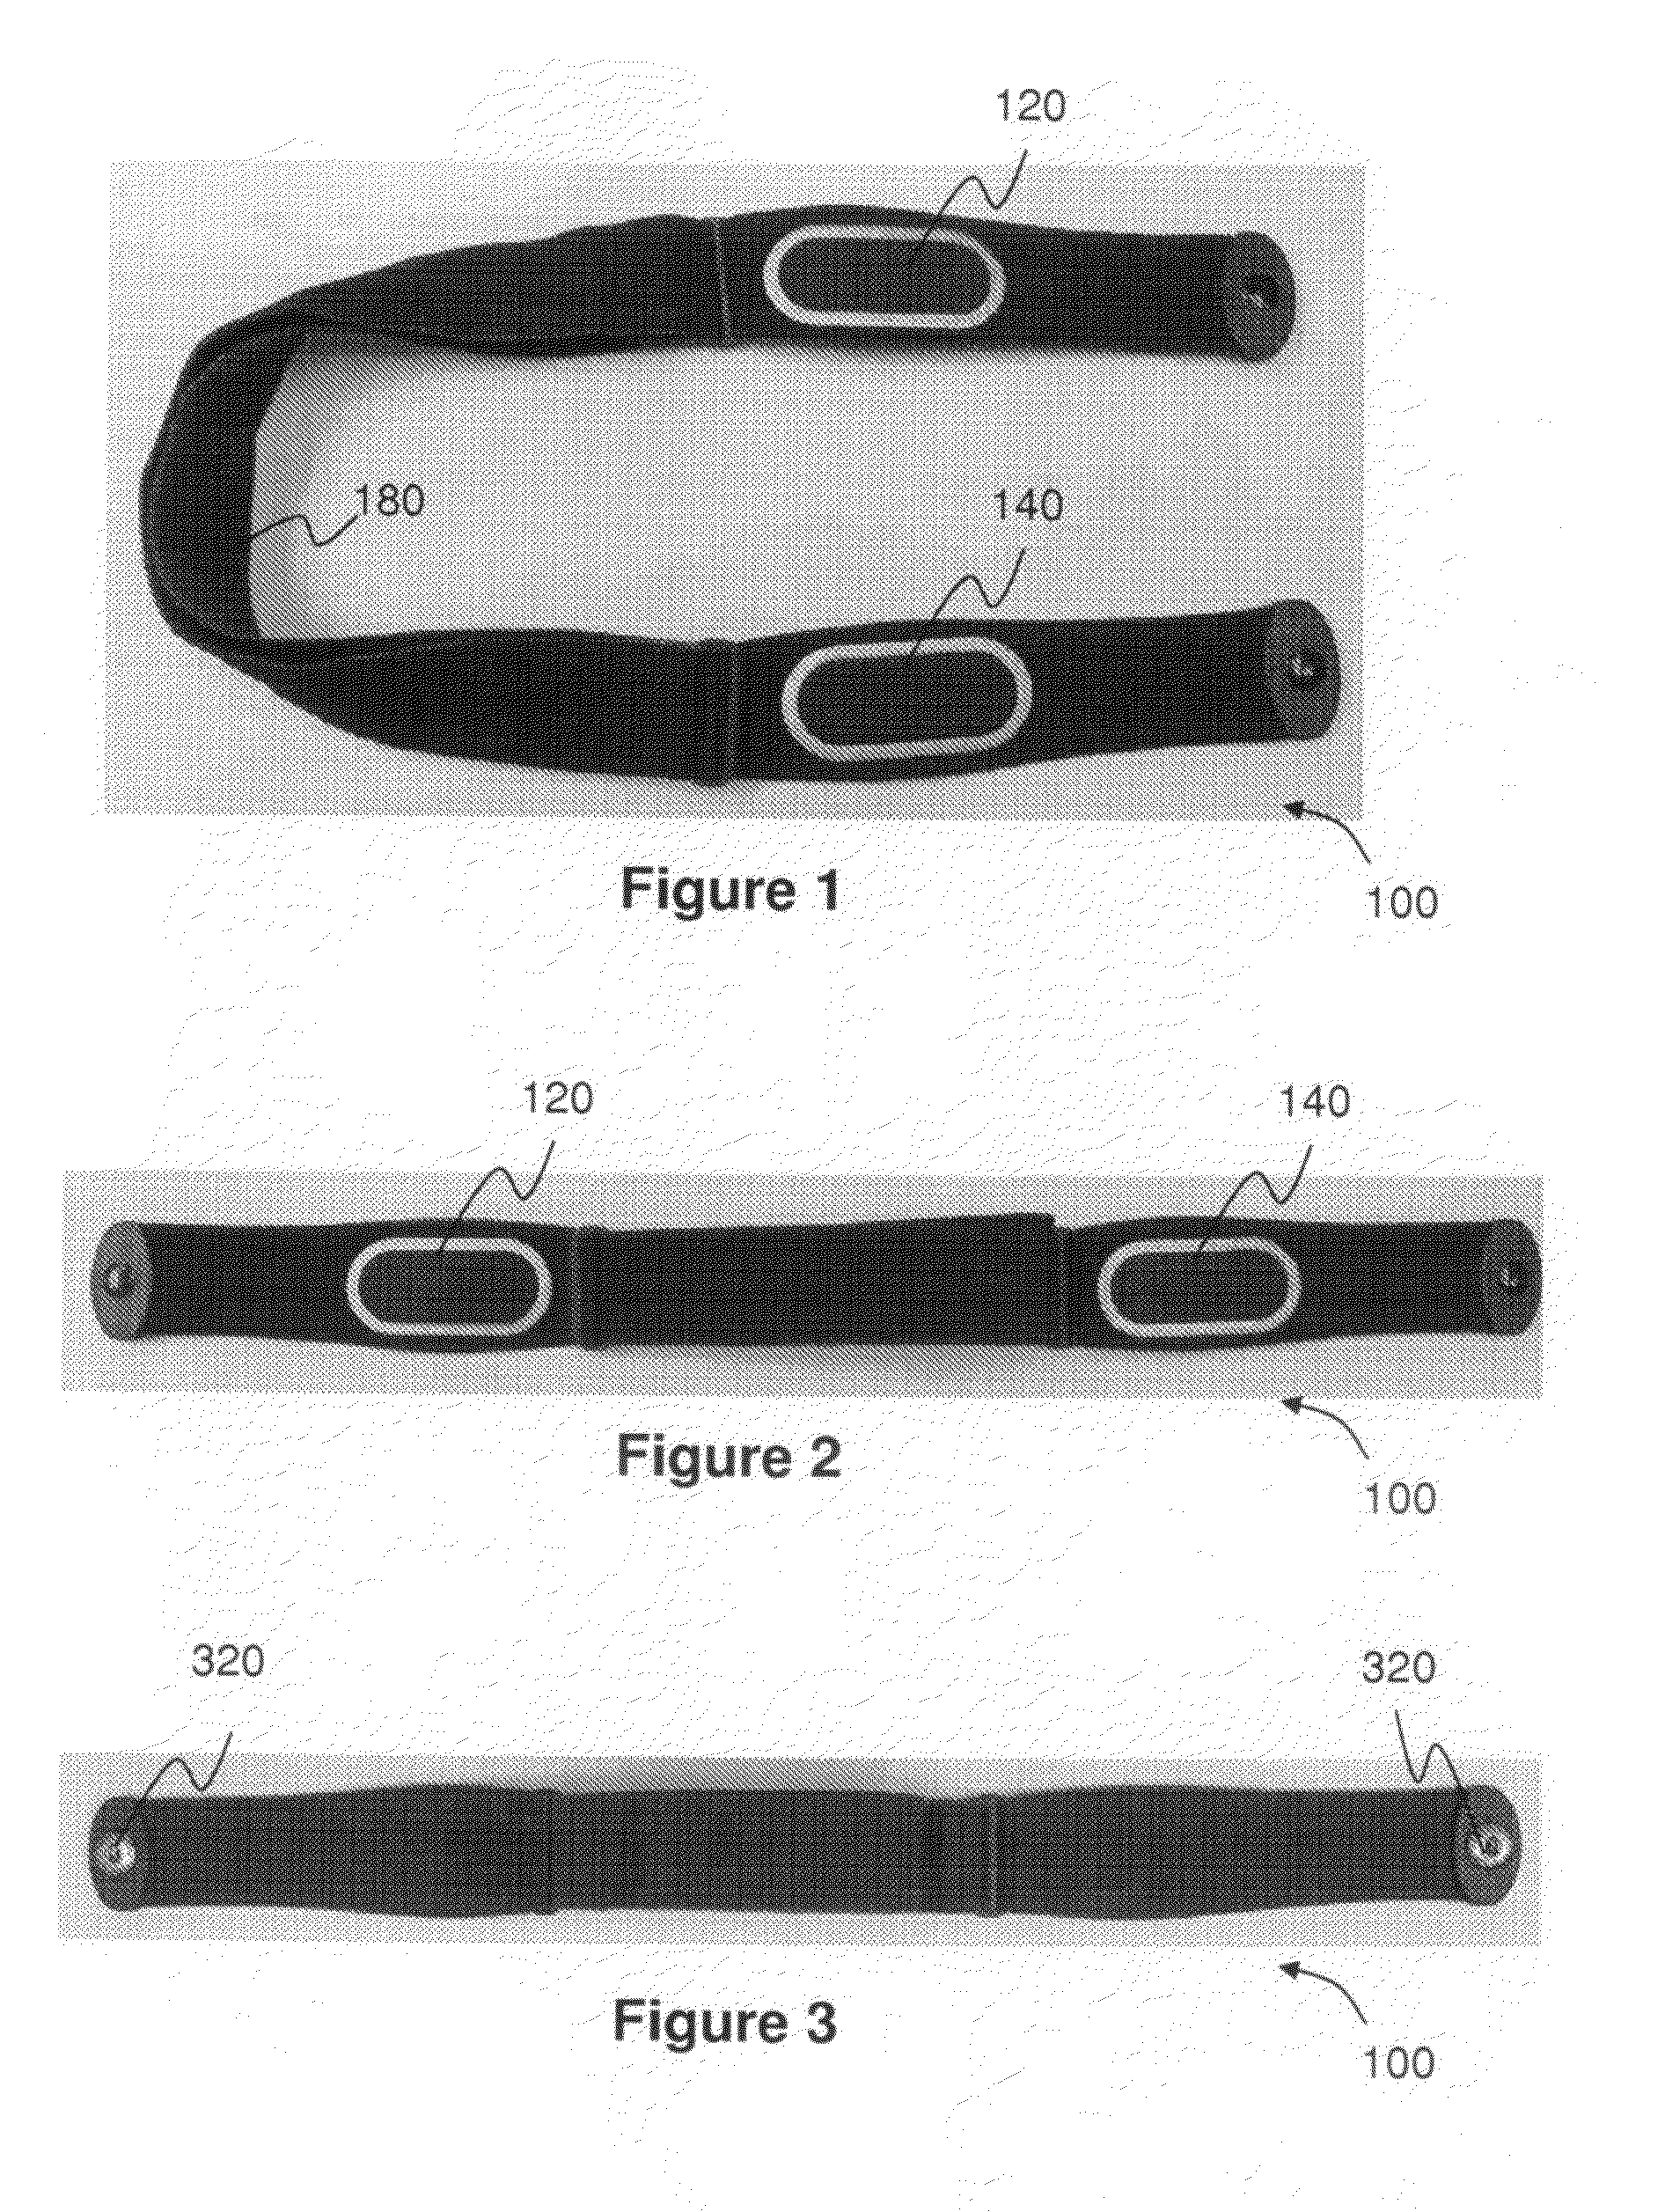 Physilogical signal collection apparatus and performance monitoring apparatus incorporating same